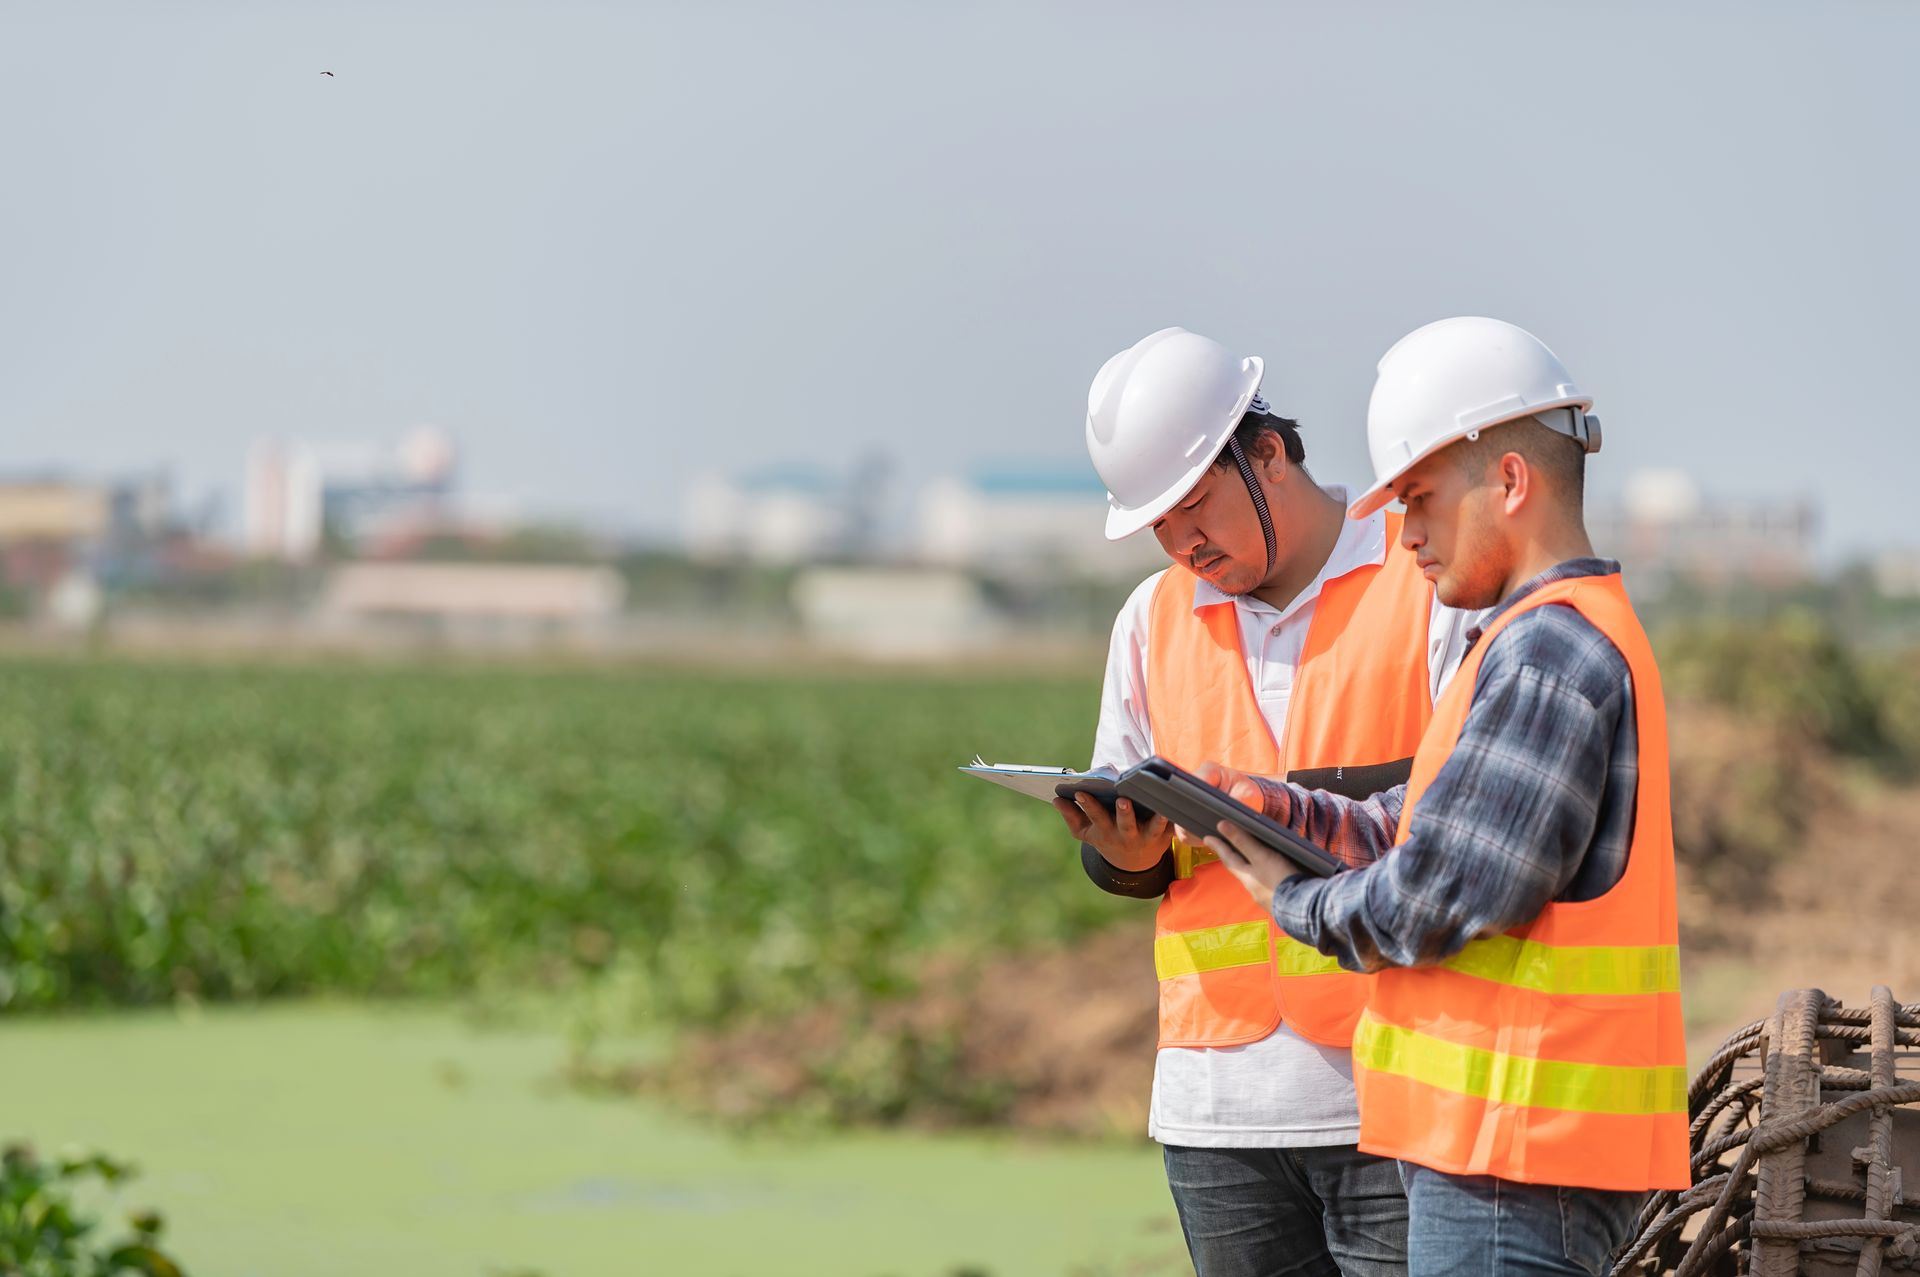 environmental consultants conduct a thorough site assessments to determine any risks and liabilities